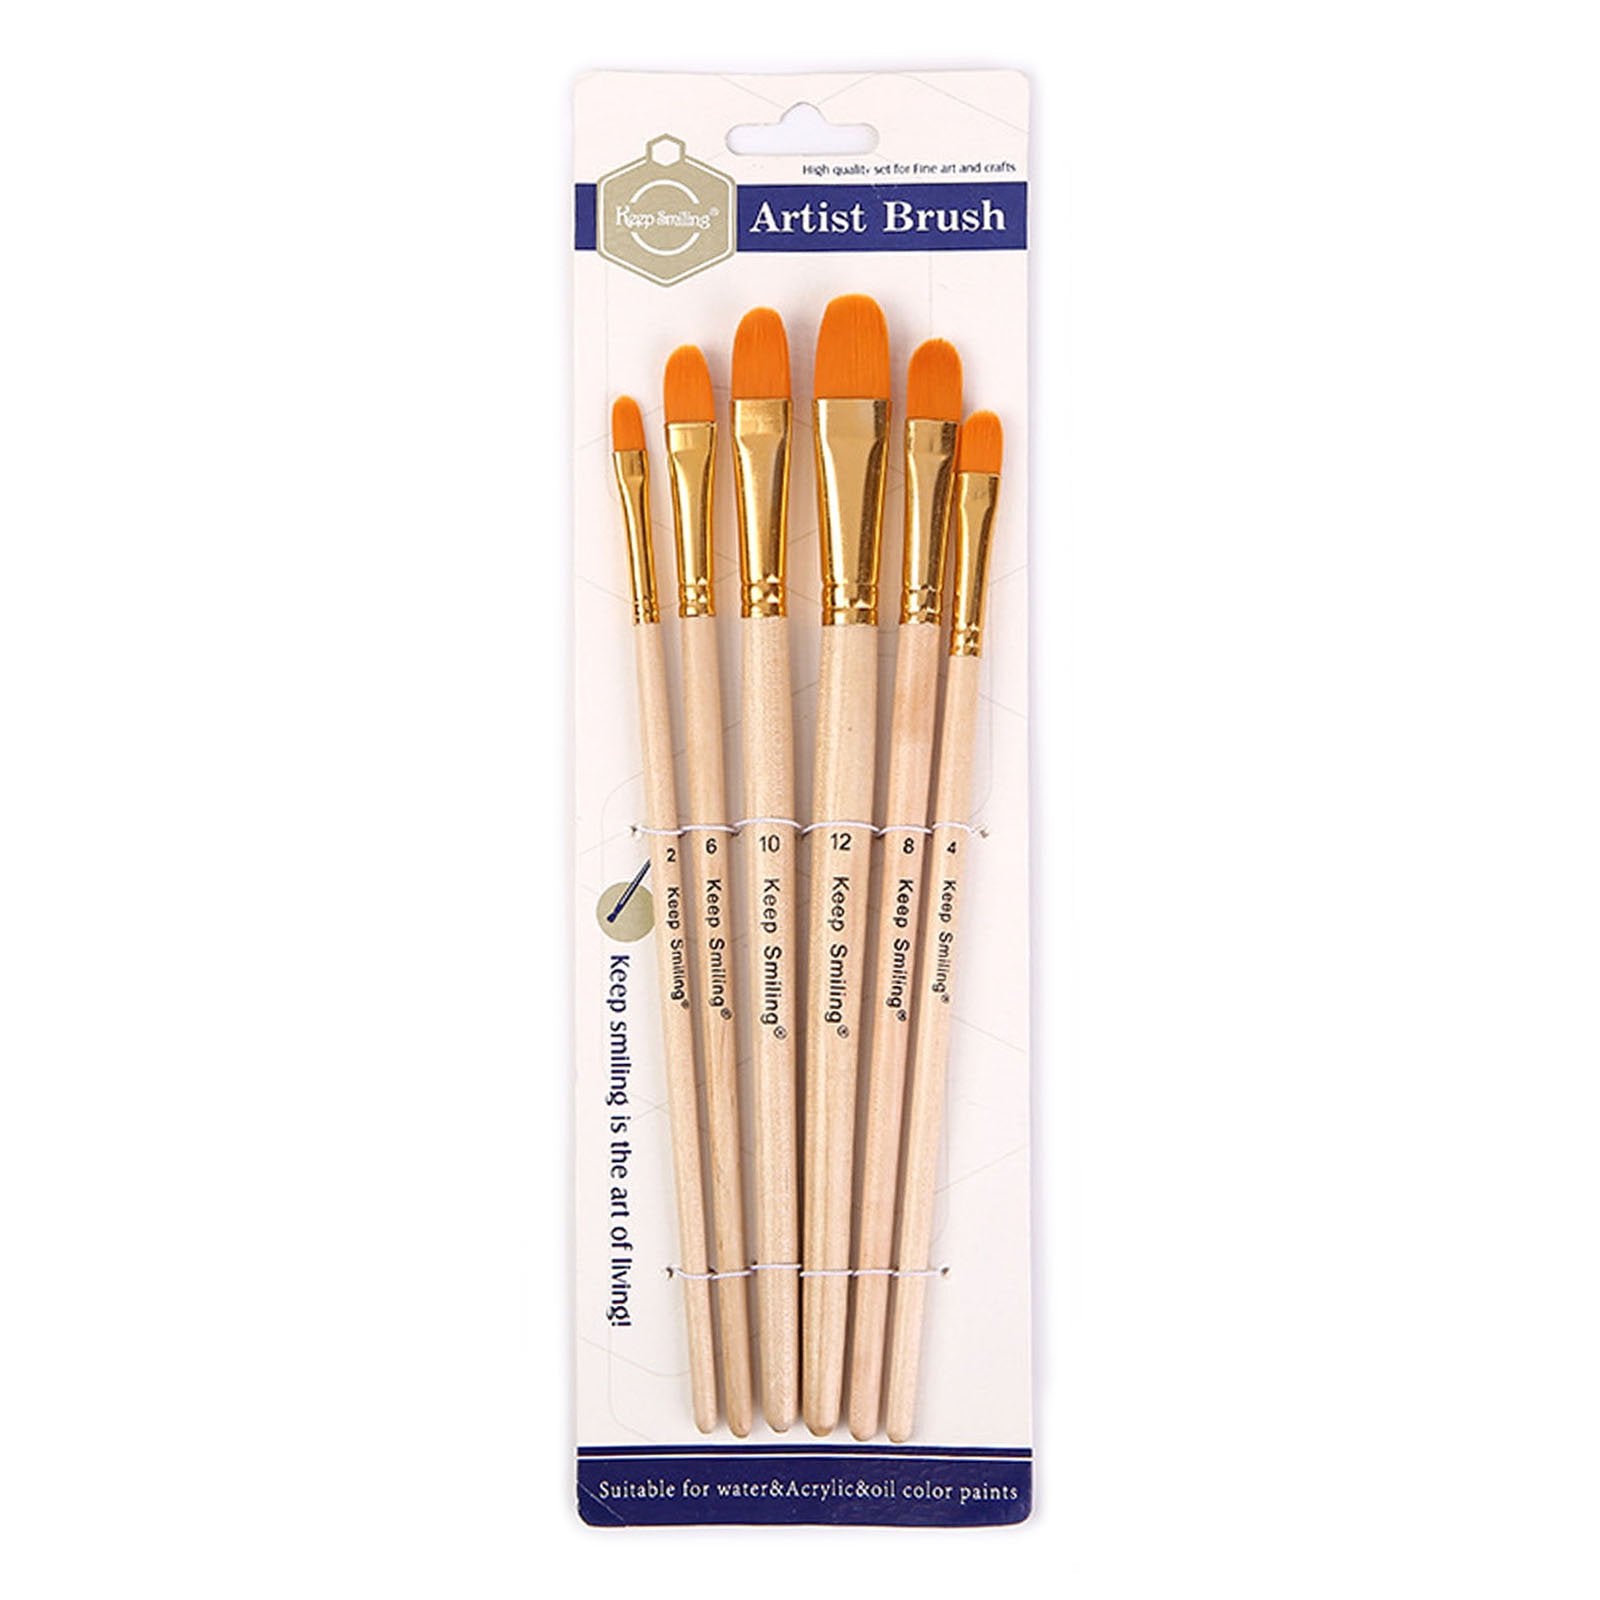 6x Paint Brushes - Round Pointed Tip Soft Nylon Hair Wooden